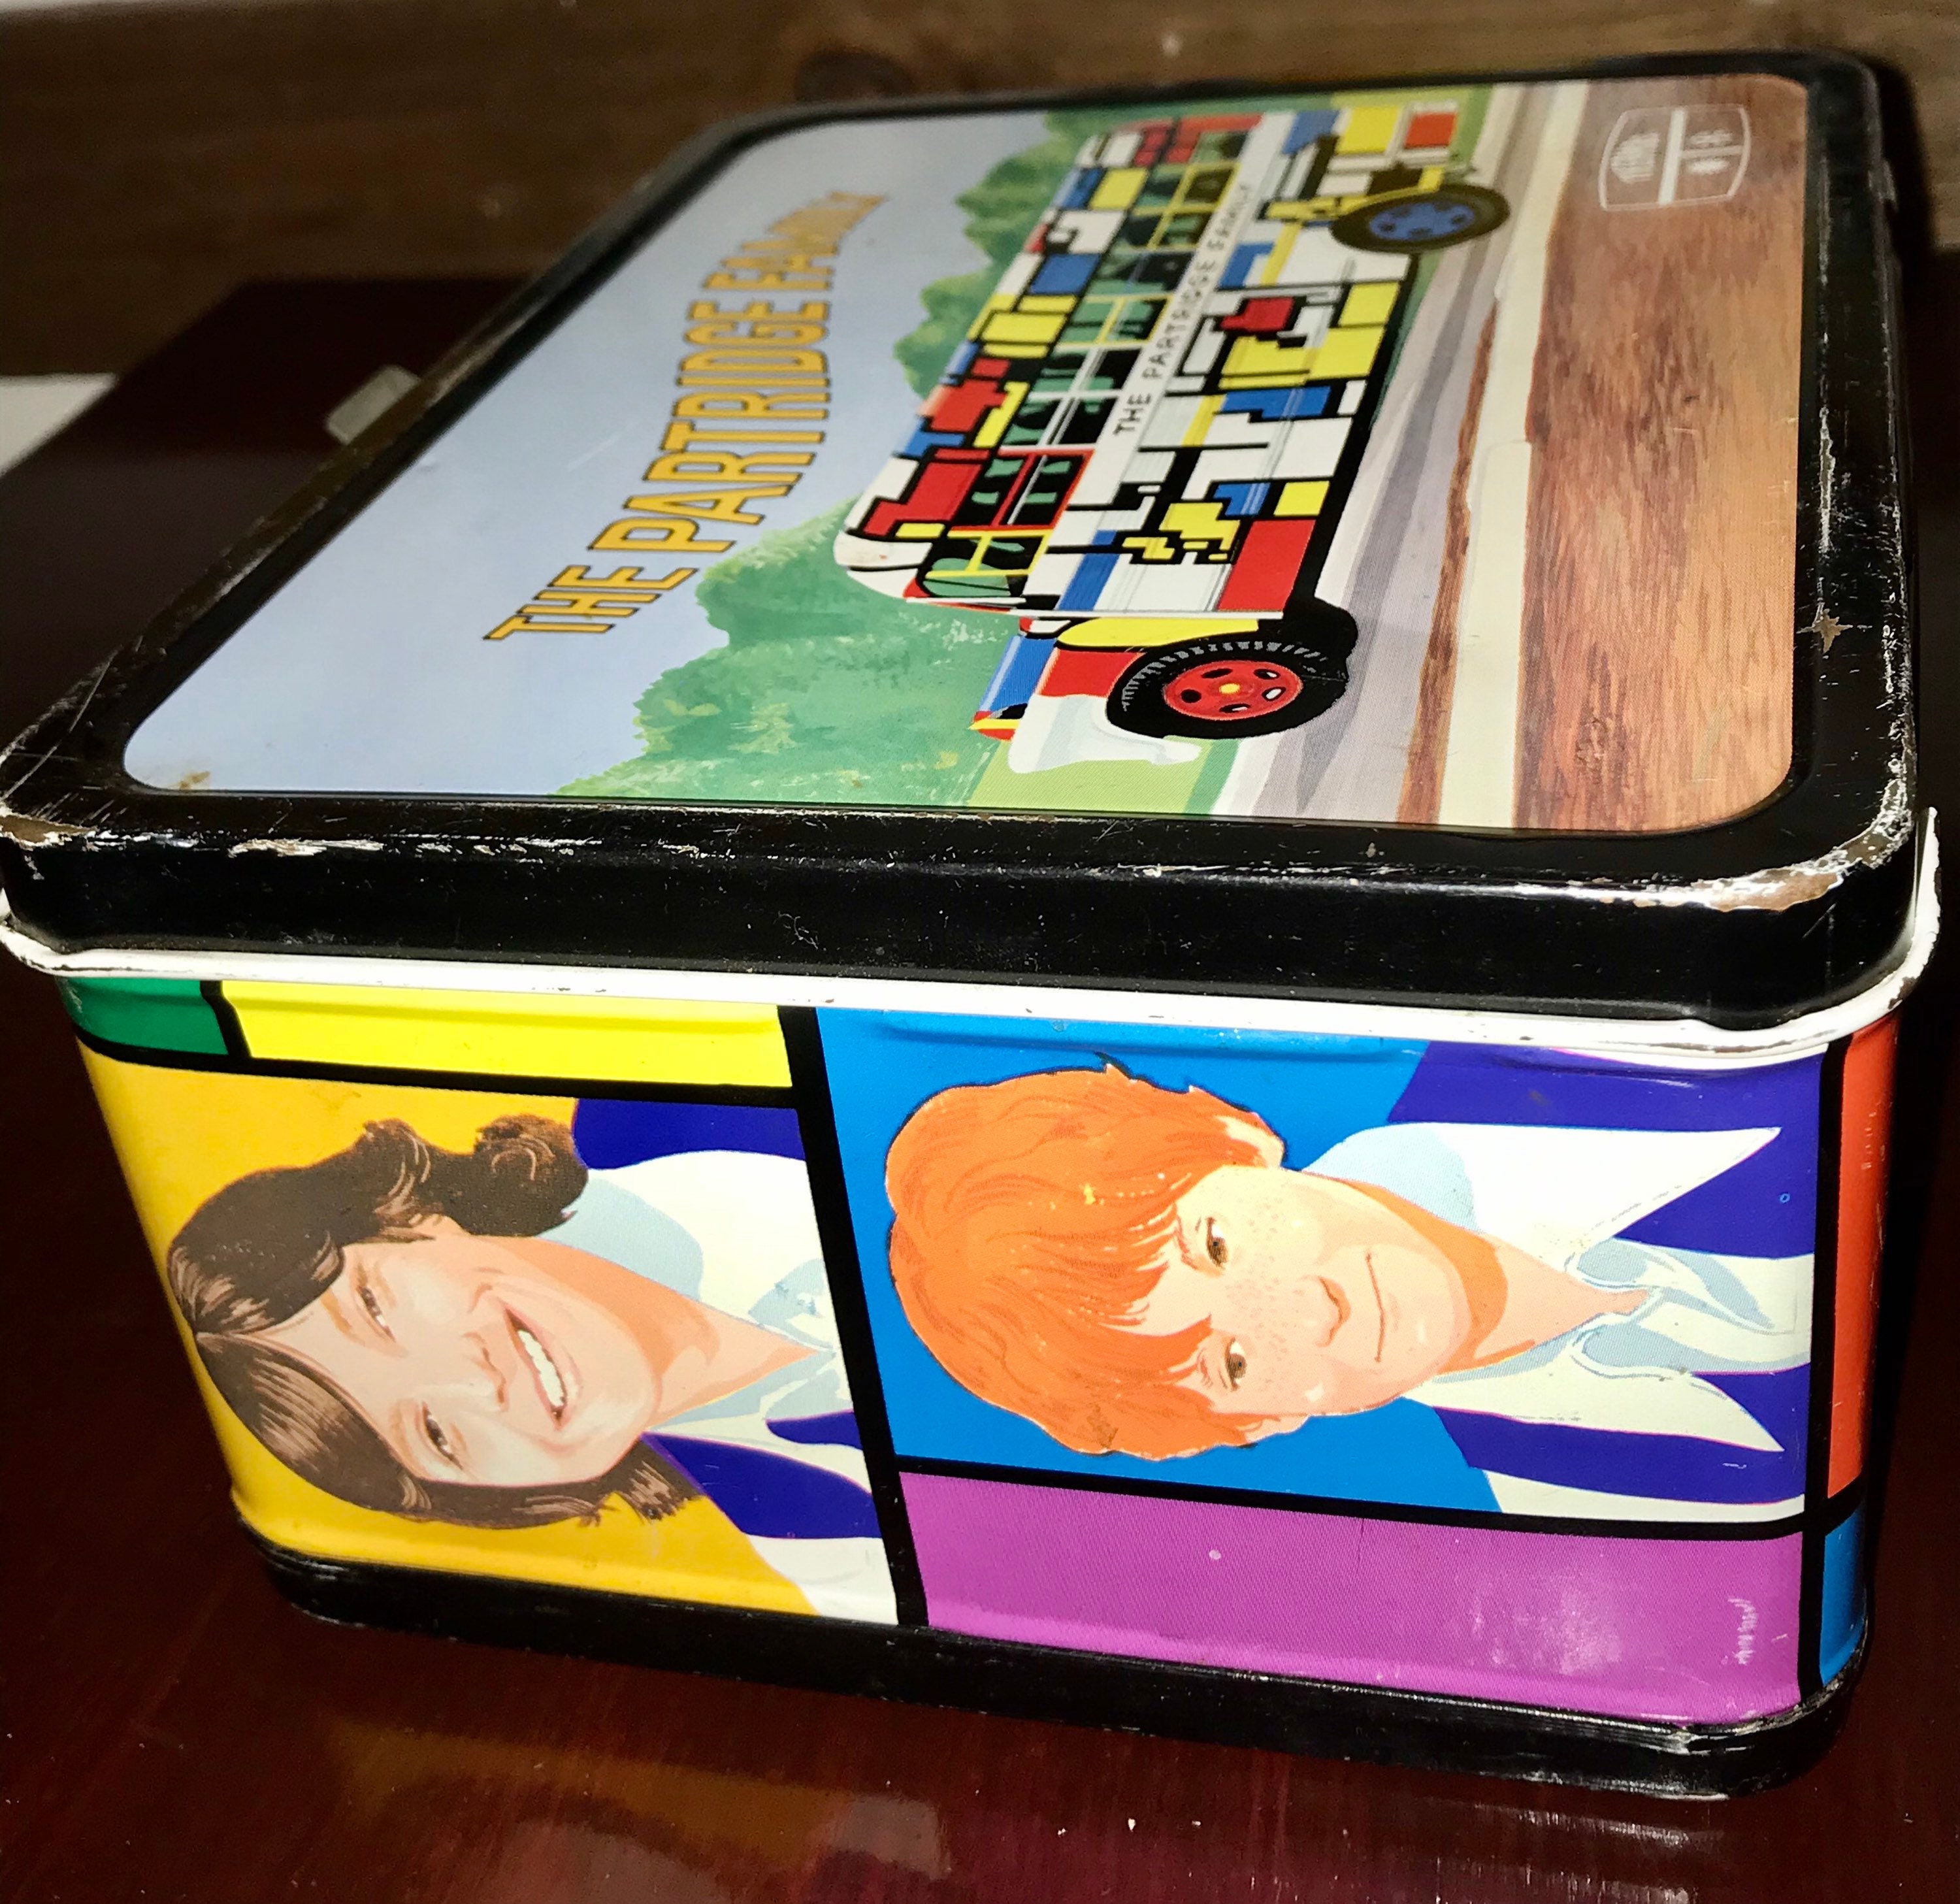 Vintage 1971 Thermos Partridge Family Lunchbox — The NAT